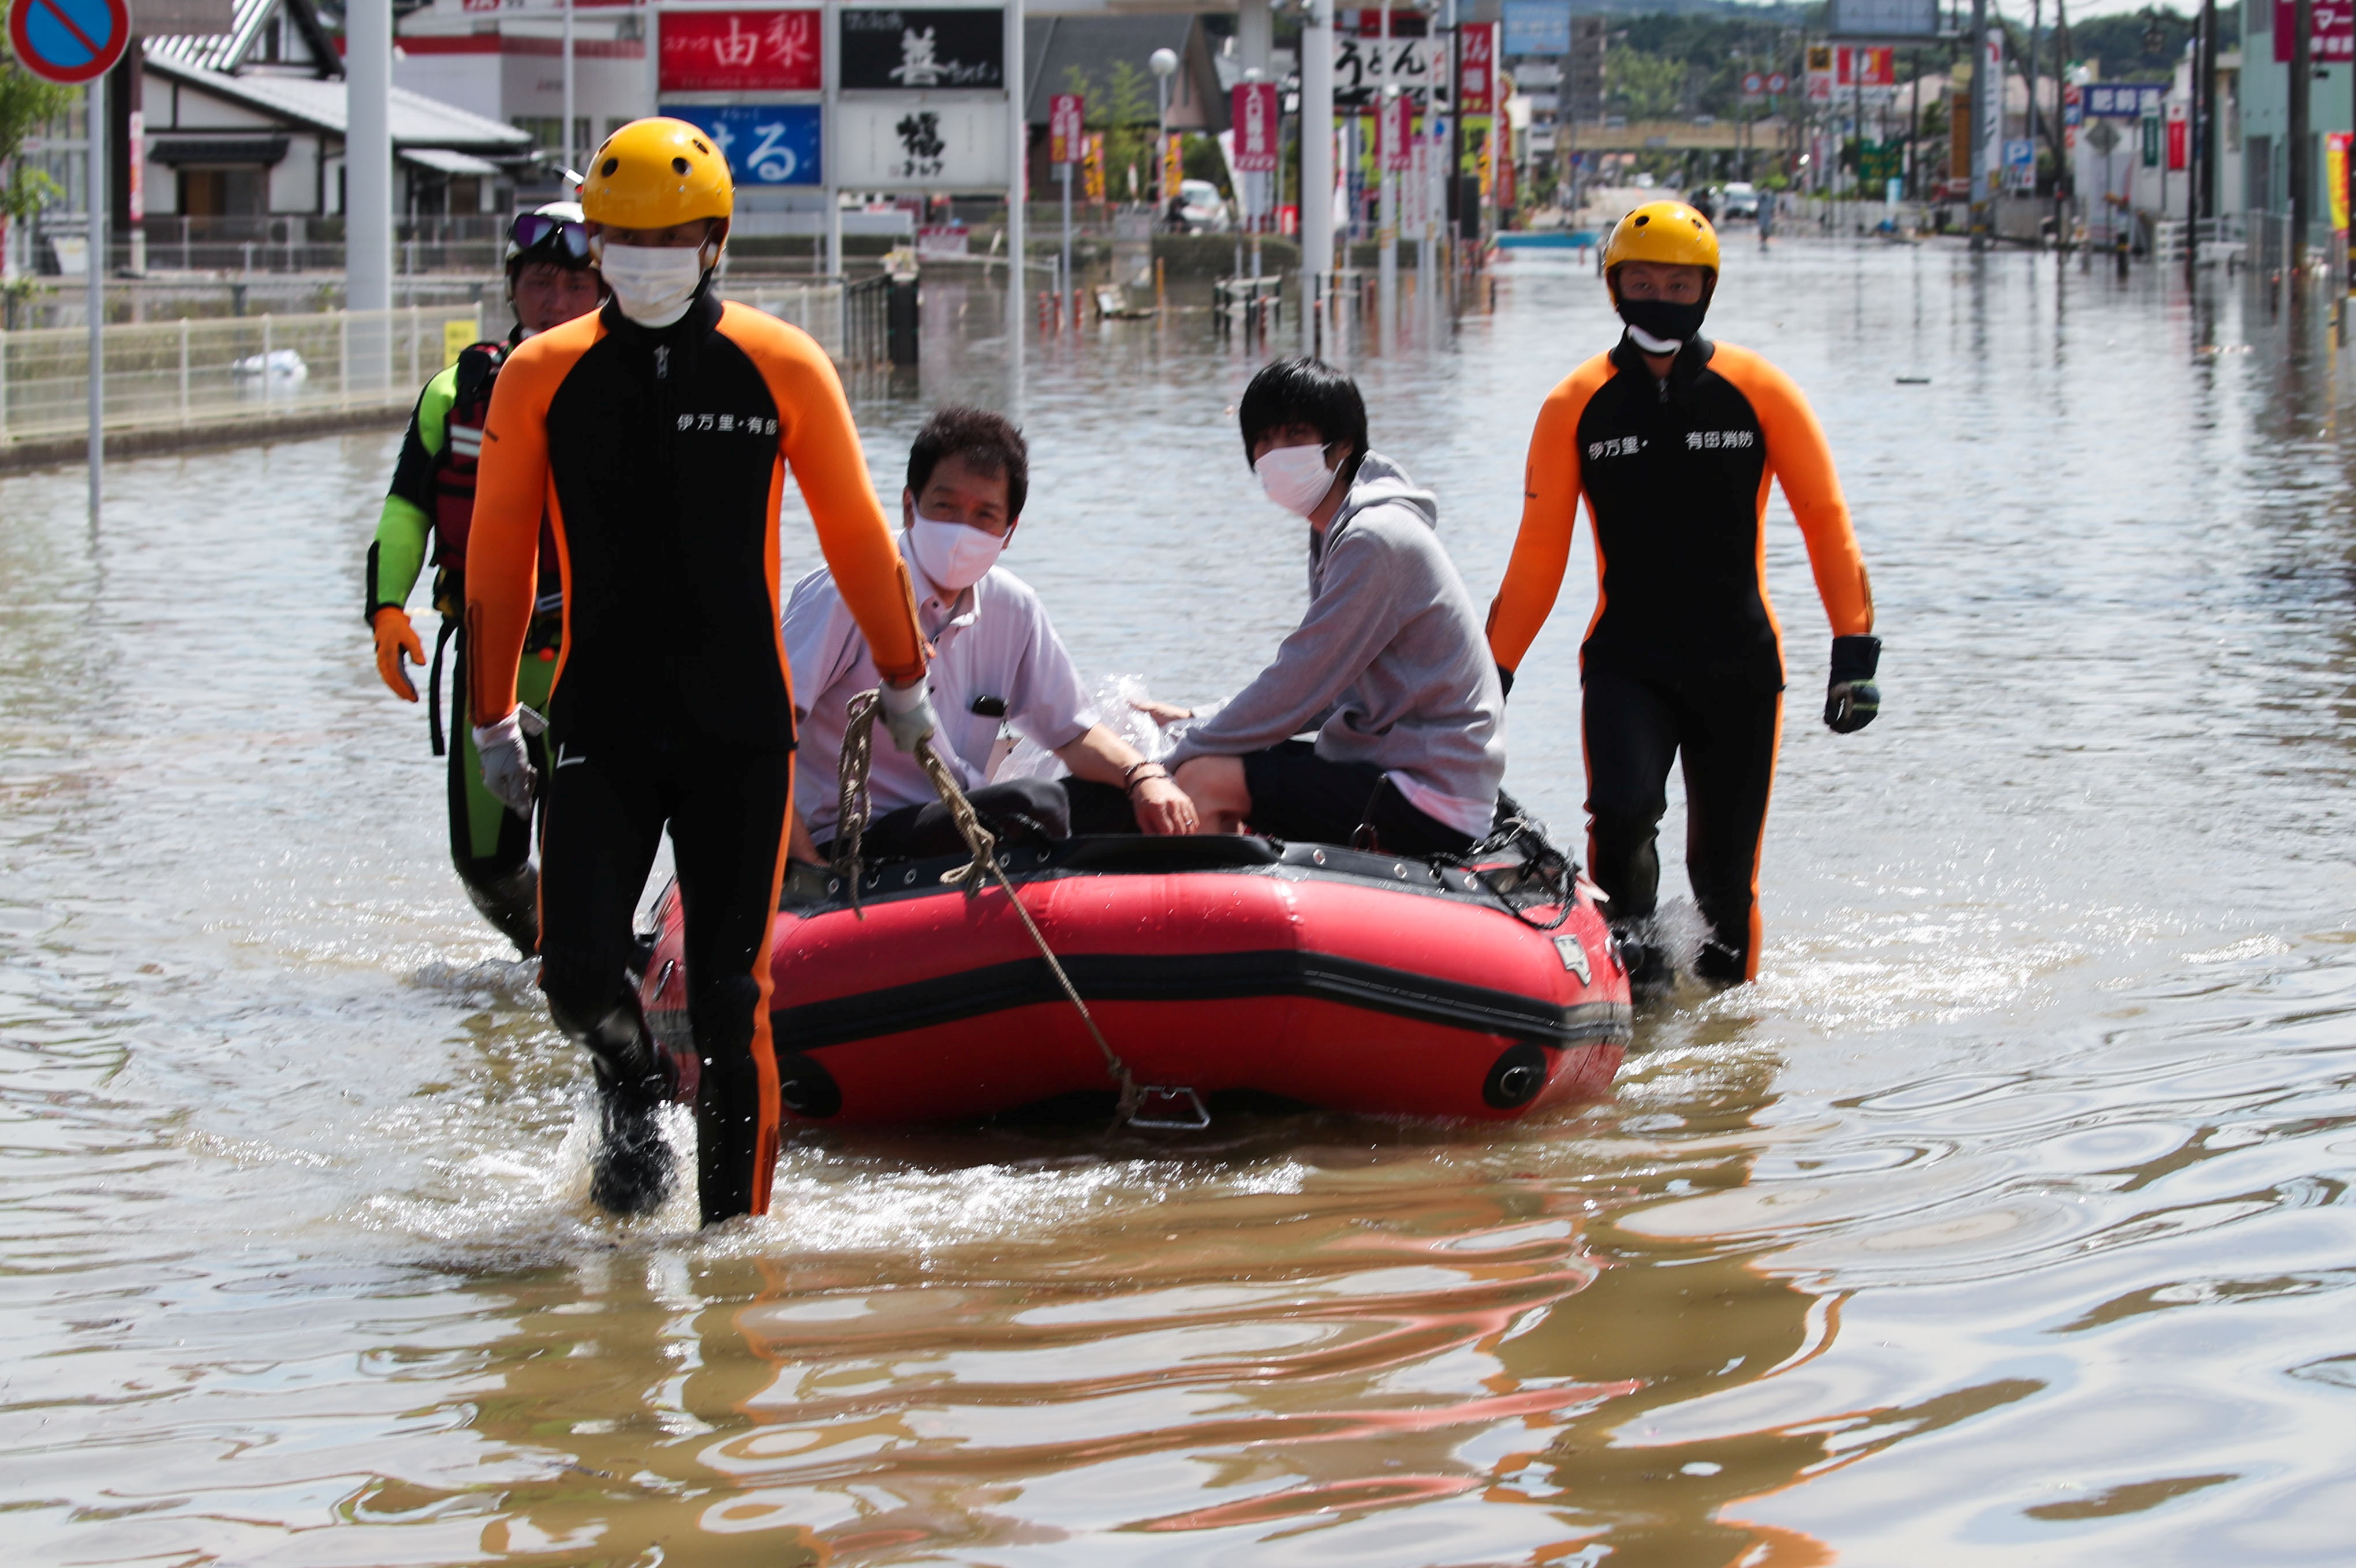 Rescue workers transport people using a boat along a flooded street in Takeo, Saga Prefecture, western Japan